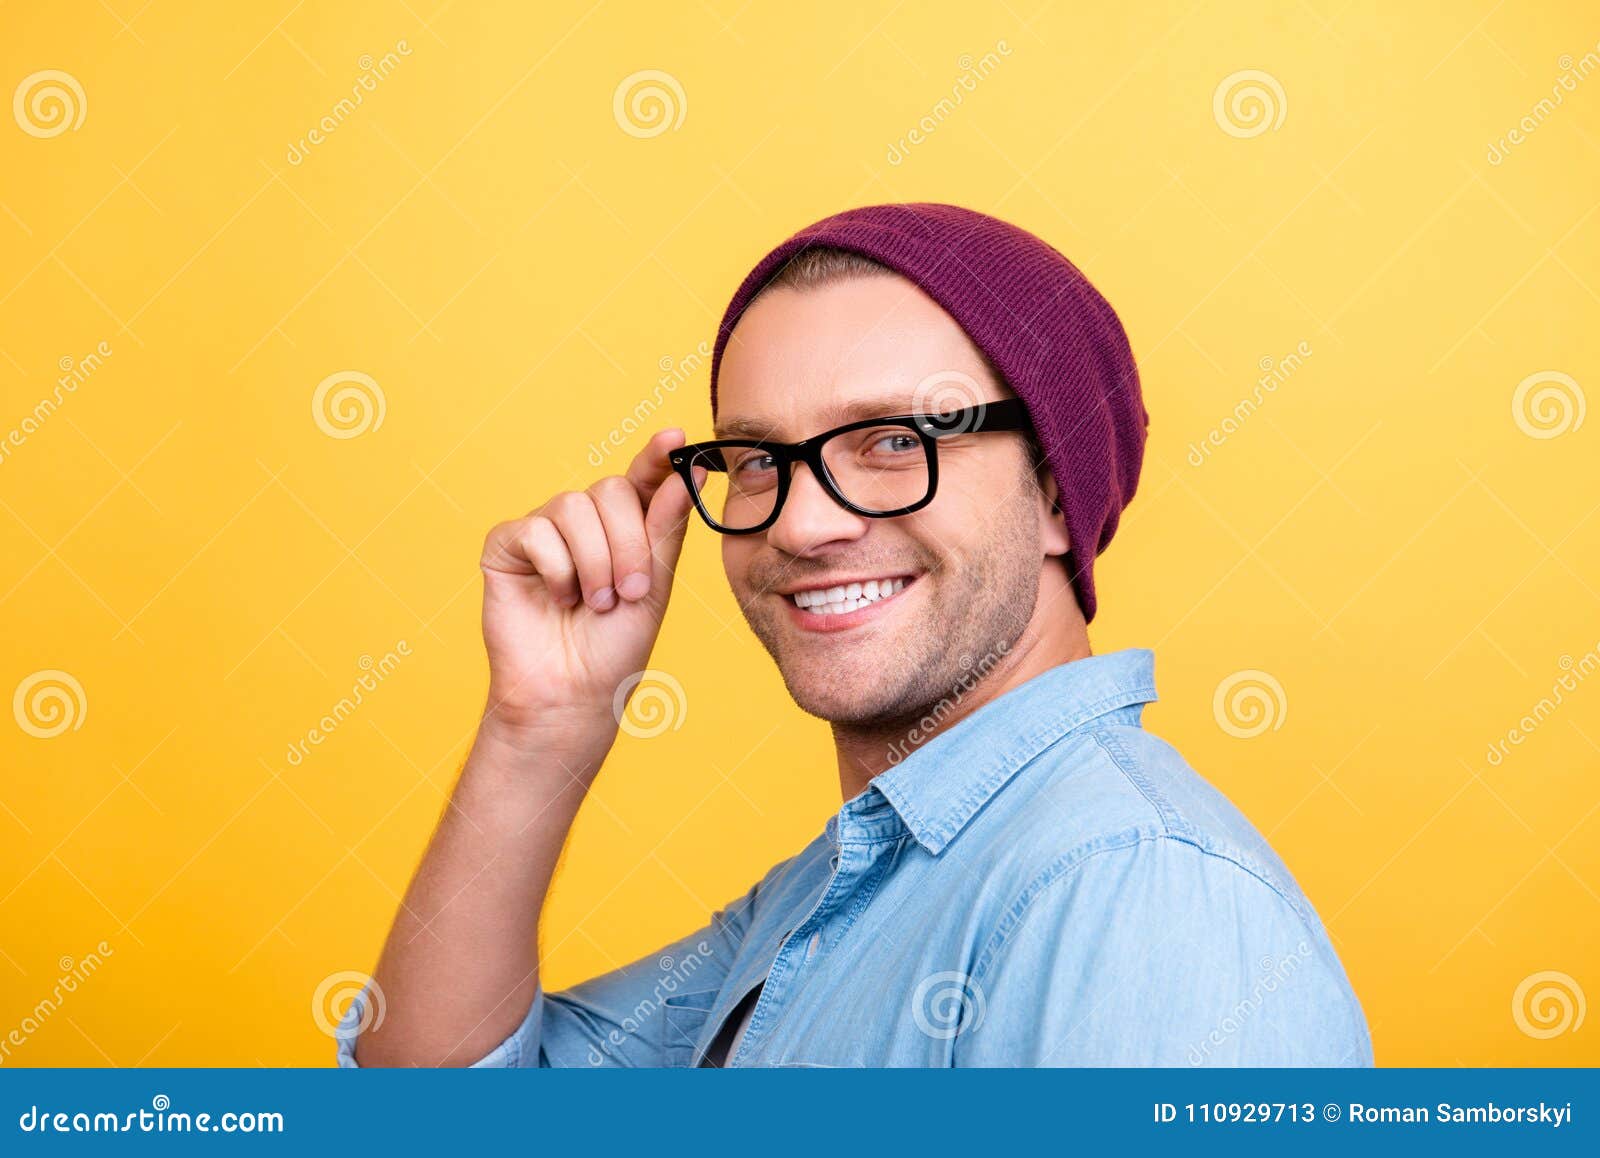 Close Up of Smiling Guy in Violet Cap, Looking at Camera, Holding ...